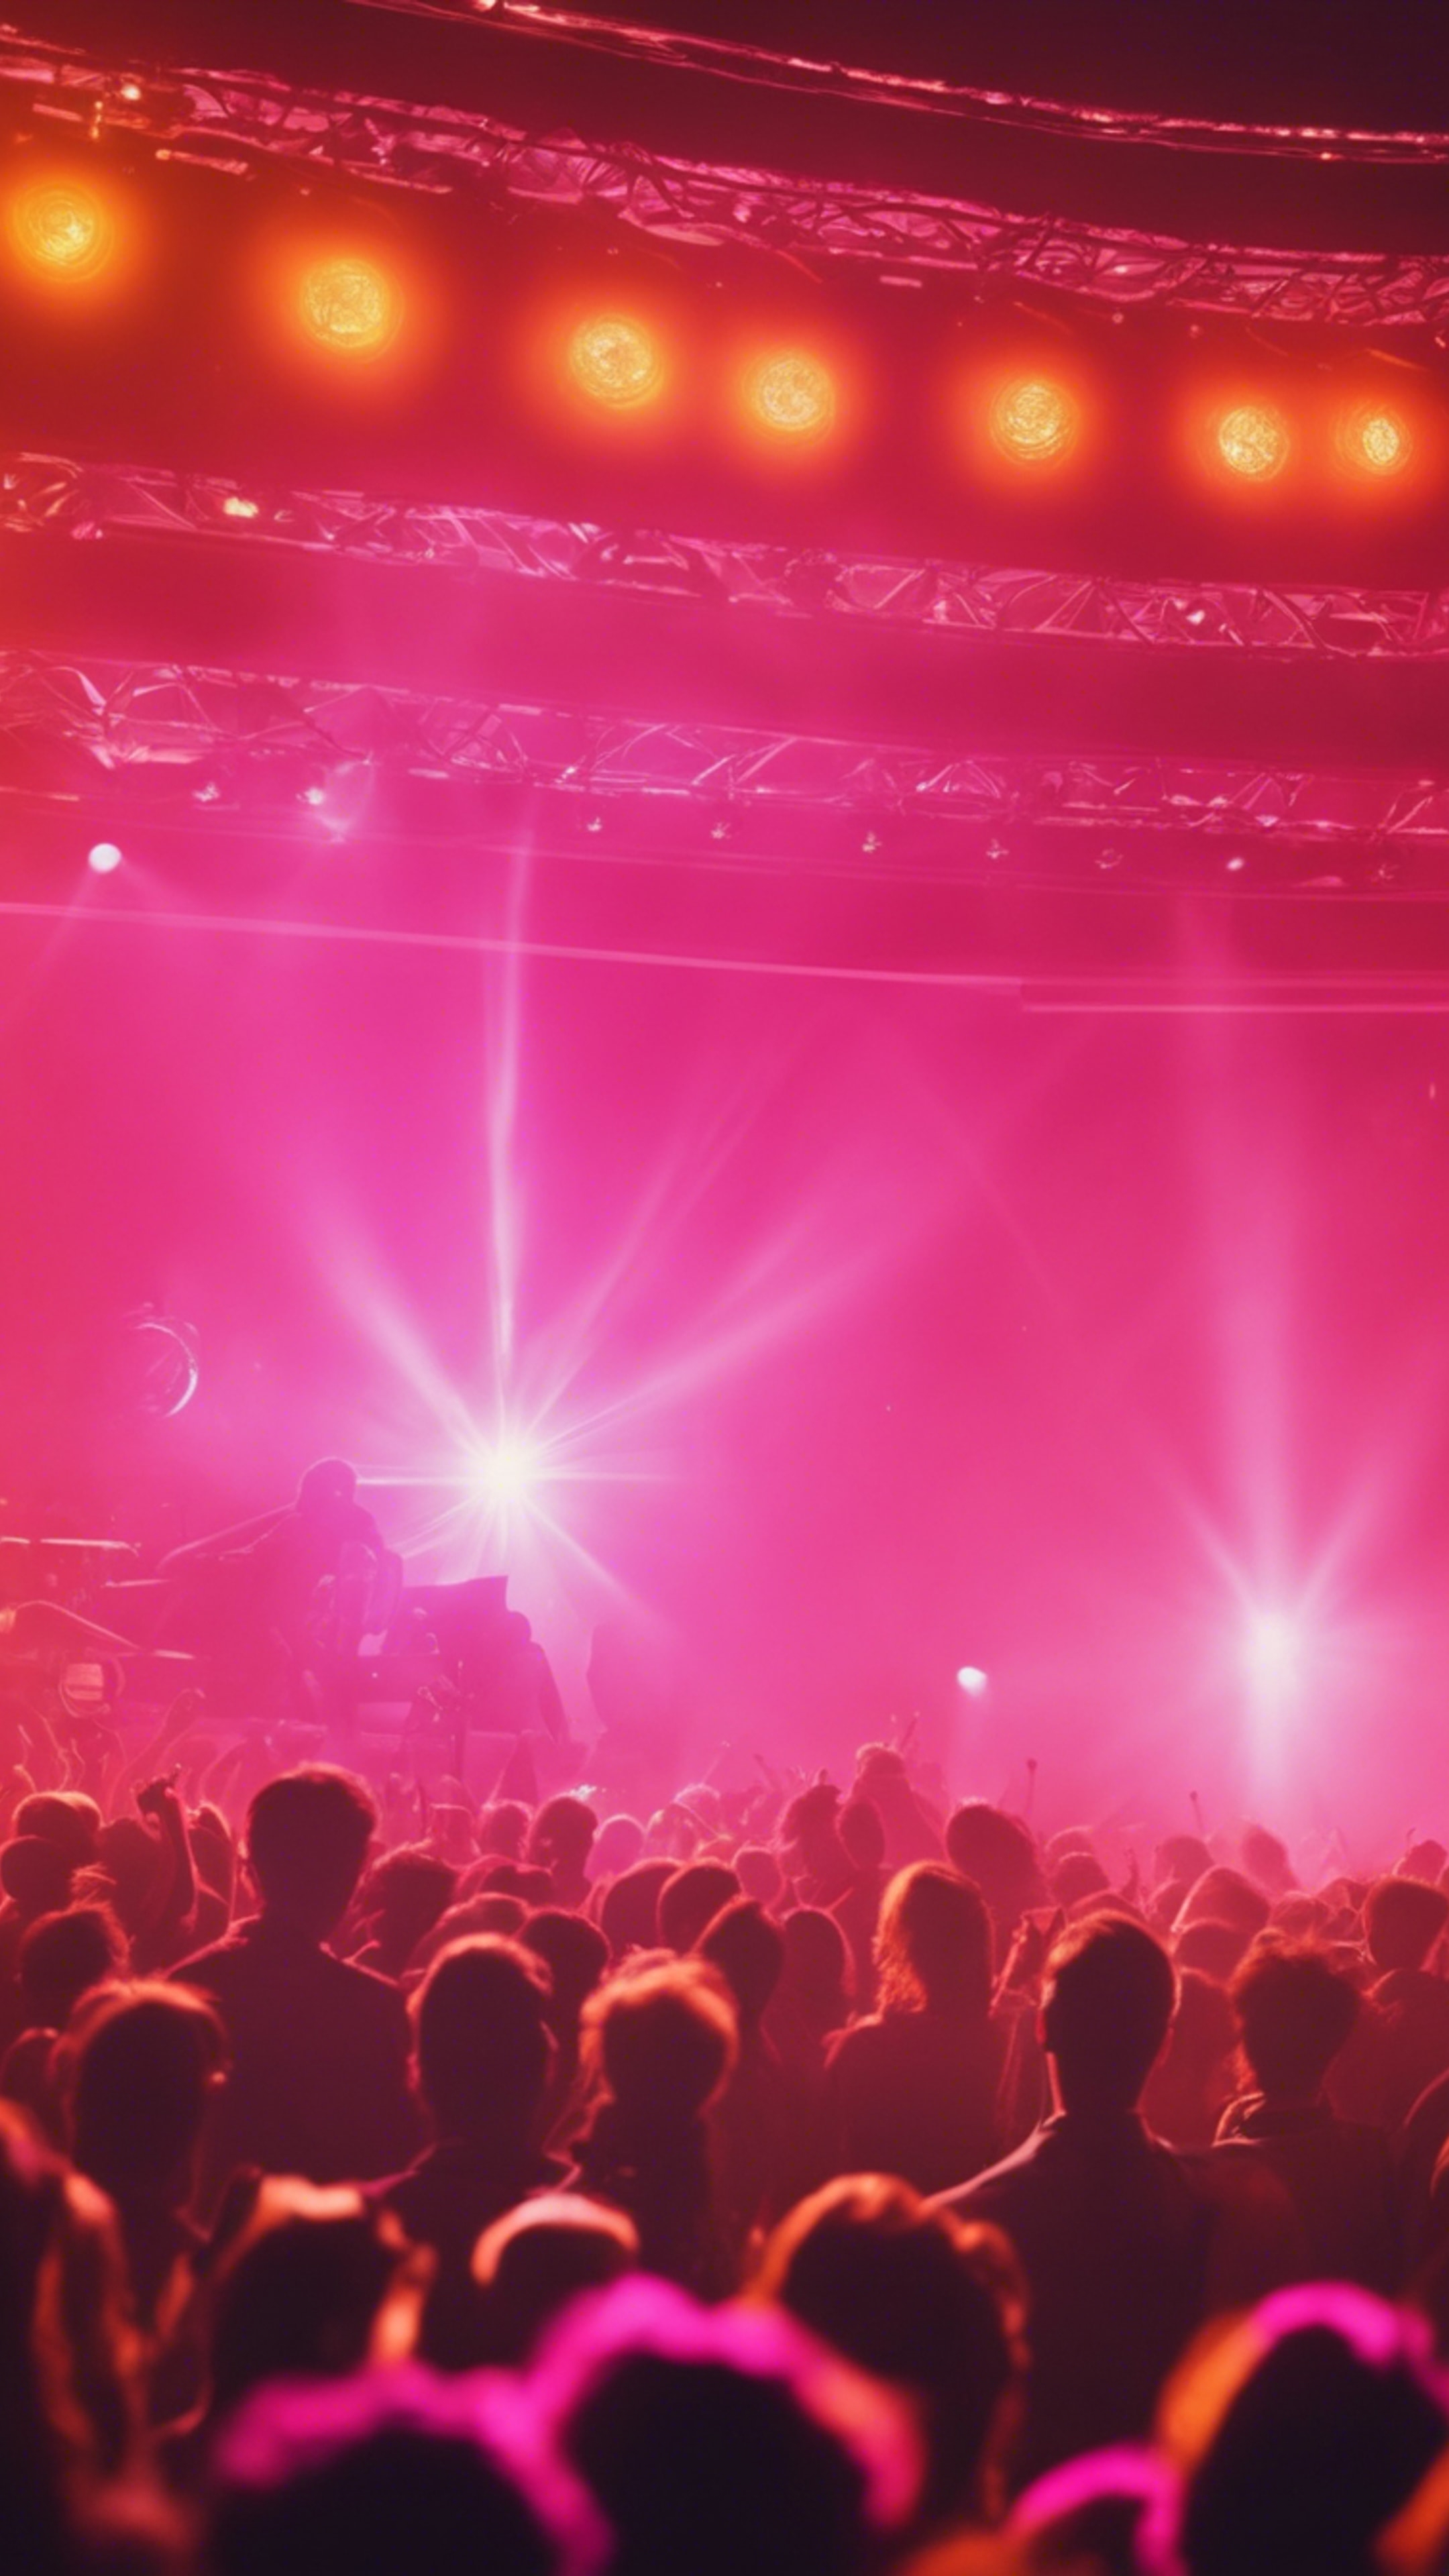 Bright orange flares from an 80s music concert with a pink stage lighting. Tapetai[6011018ba8cb439fb9ea]